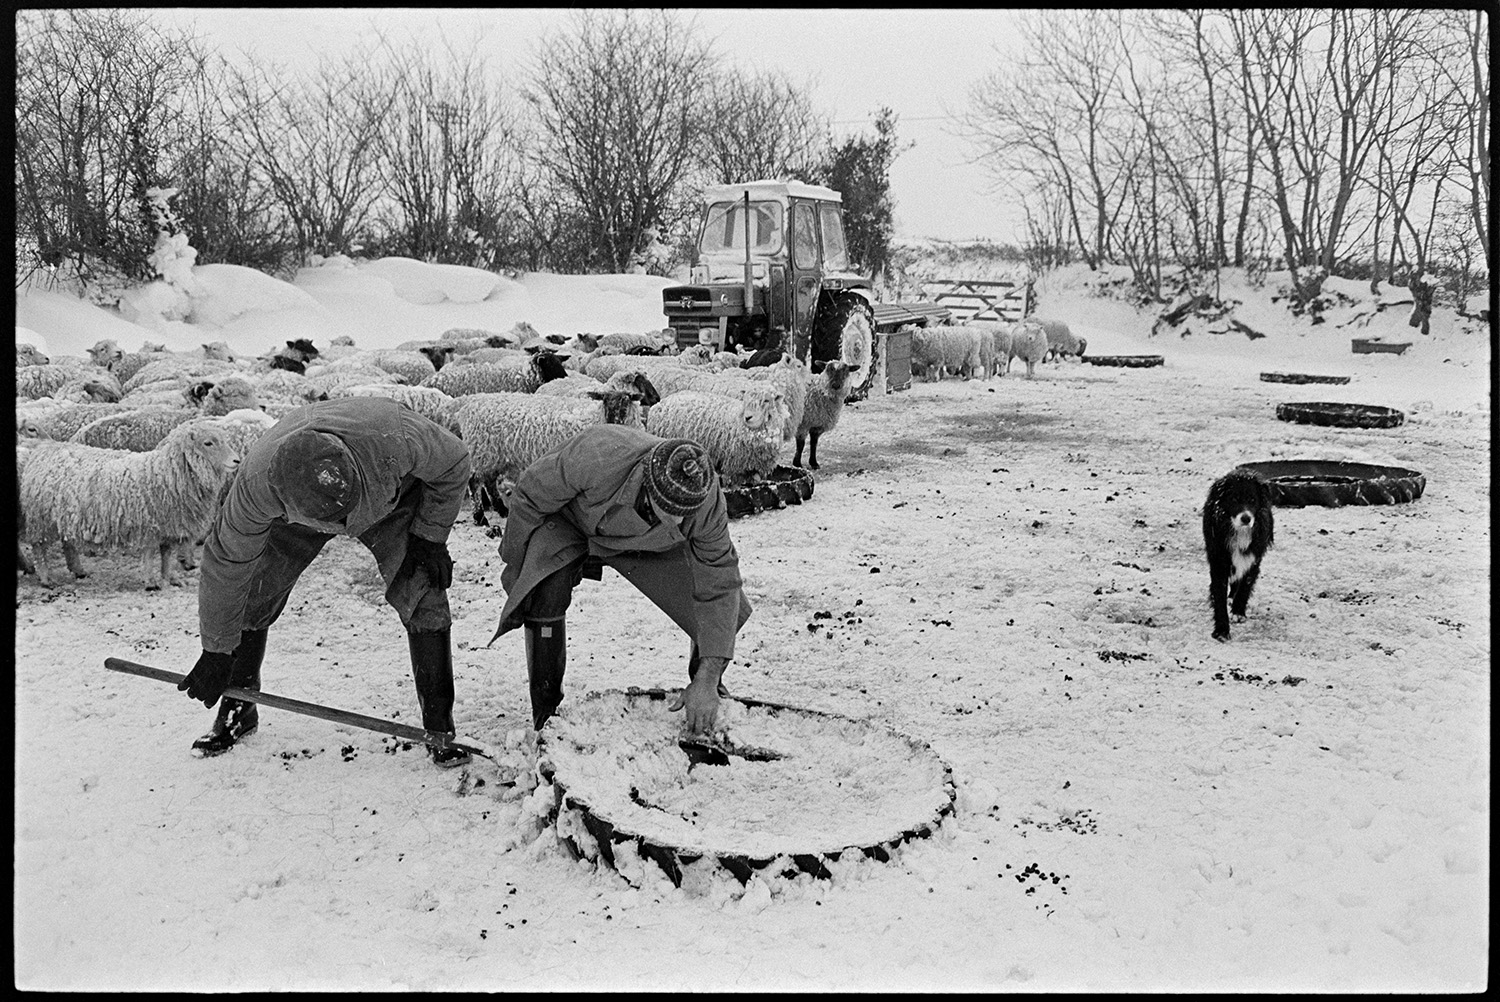 Snow, feeding hay to sheep after blizzard. 
[Alf Pugsley and Phillip George feeding hay to sheep in a snow covered field at Lower Langham, Dolton. They are digging out a tyre from the snow which has been cut in half and used as a trough. A dog, tractor and flock of sheep are in the background and snowdrifts can be seen against the hedgerows.]